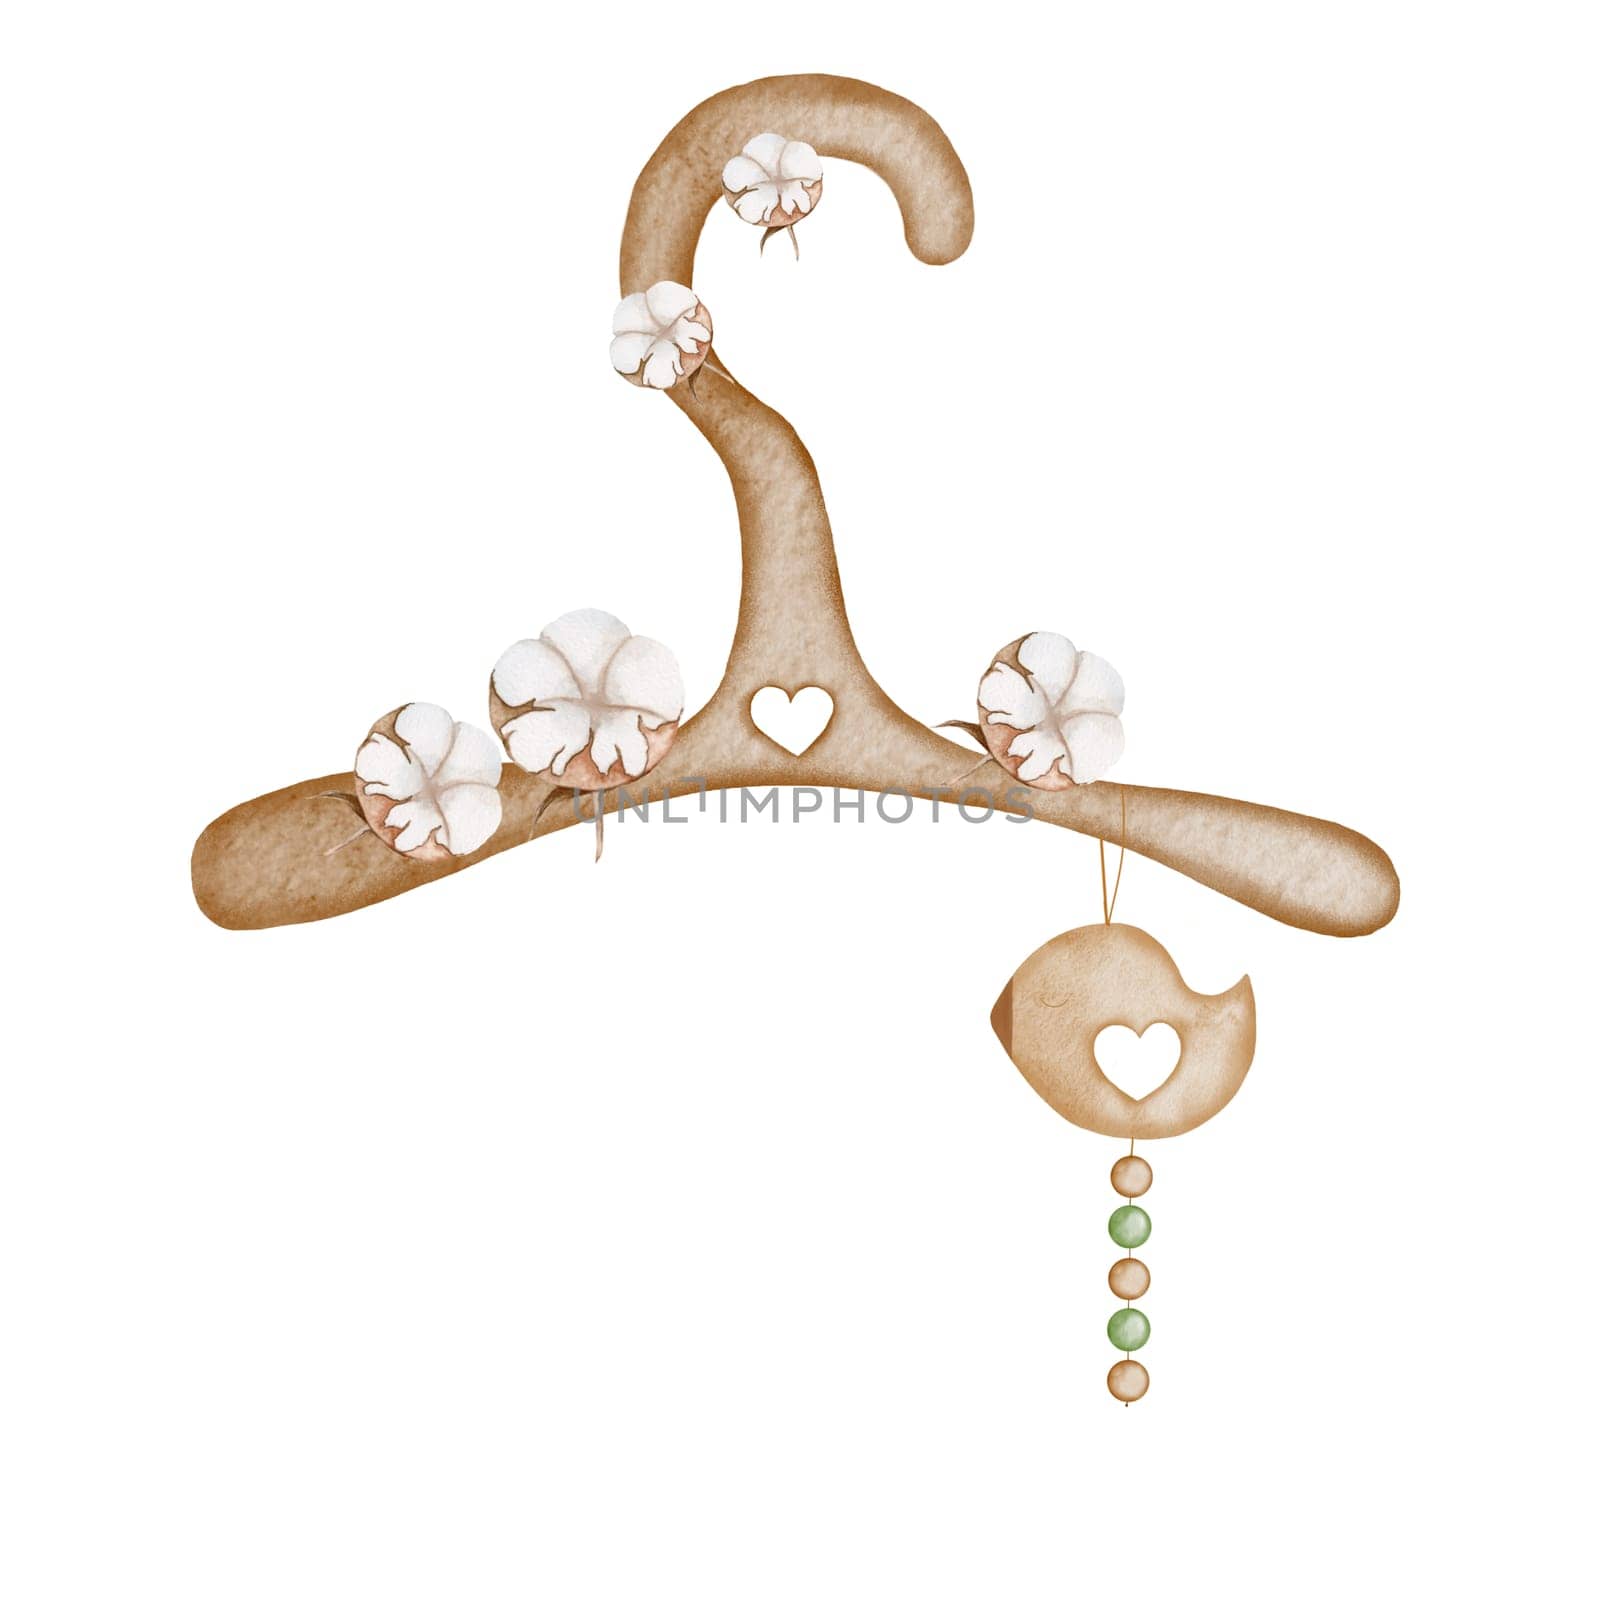 Watercolor drawing of a cute wooden hanger decorated with cotton flowers with a rattle. Pretty illustration for baby shower invitations and cards and for the birth of a baby.